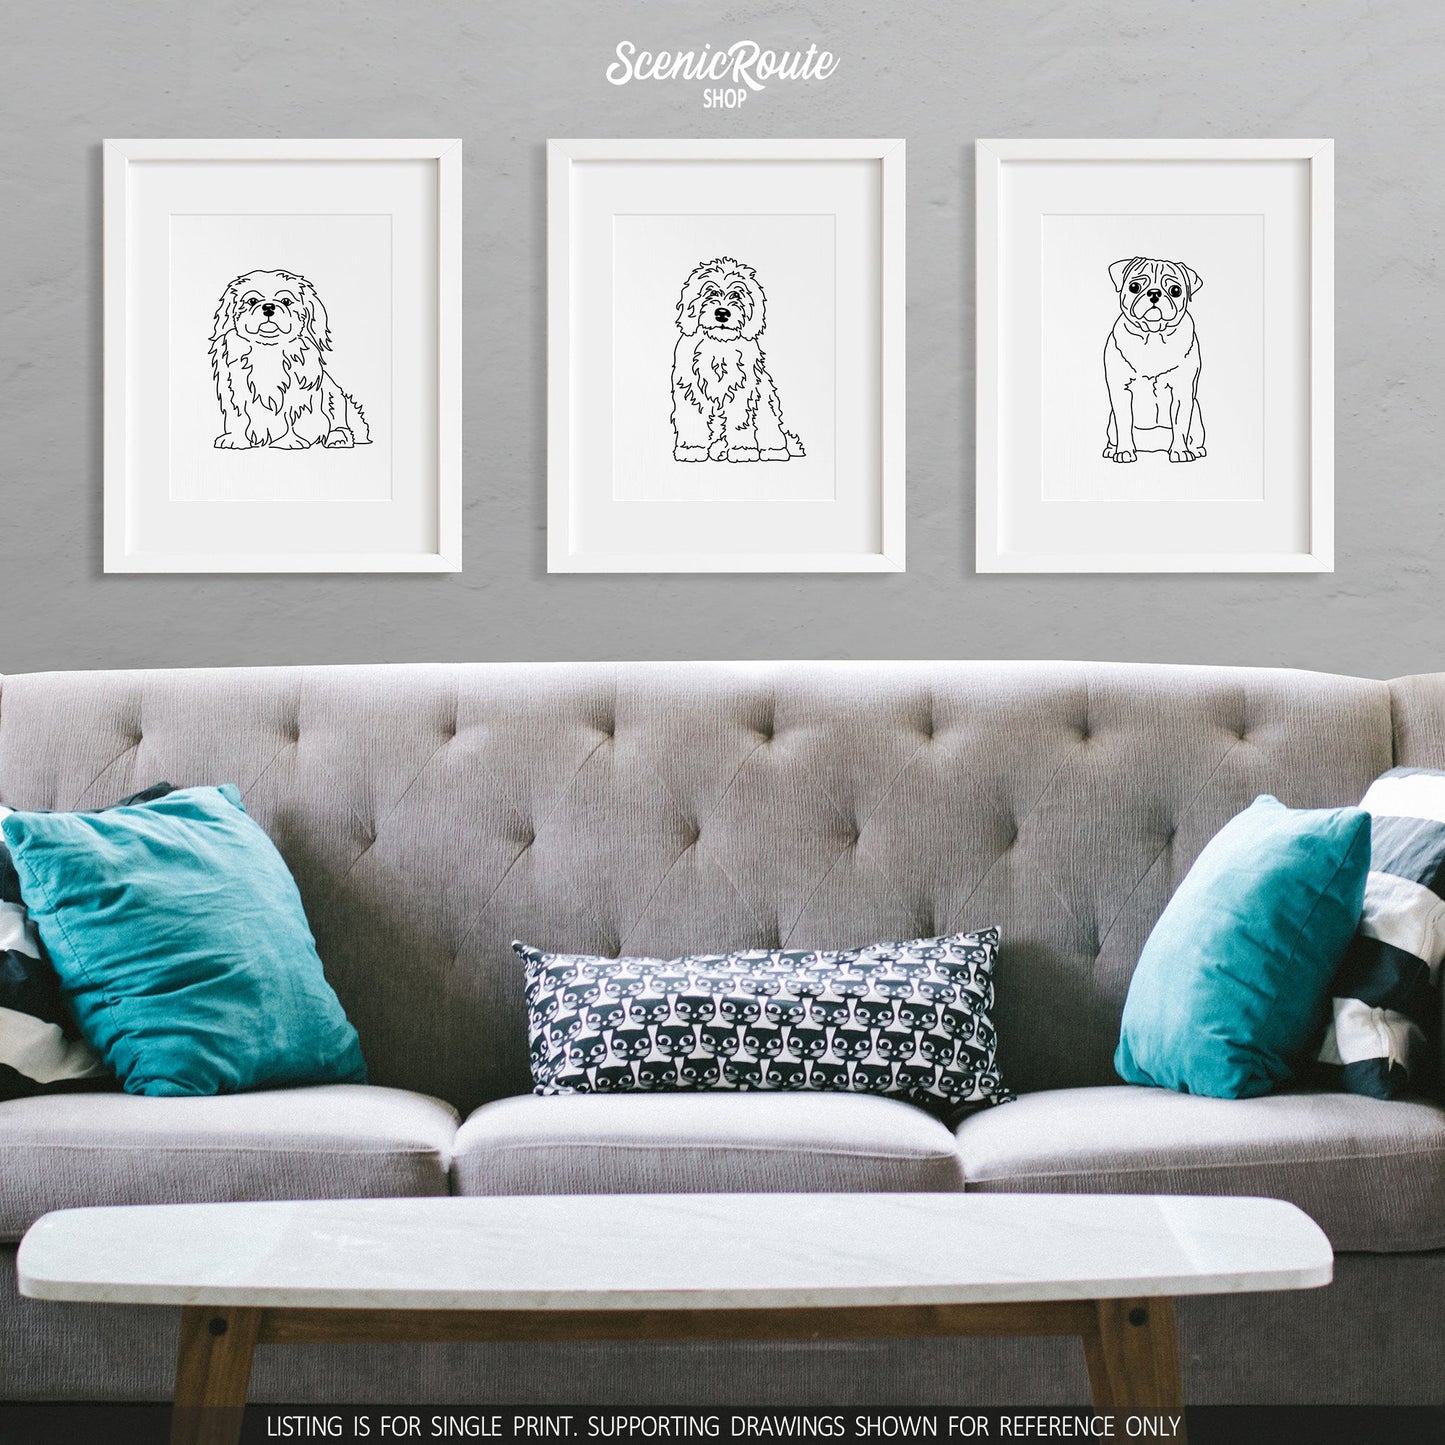 A group of three framed drawings on a gray wall above a couch. The line art drawings include a Pekingese dog, a Sheepadoodle dog, and a Pug dog